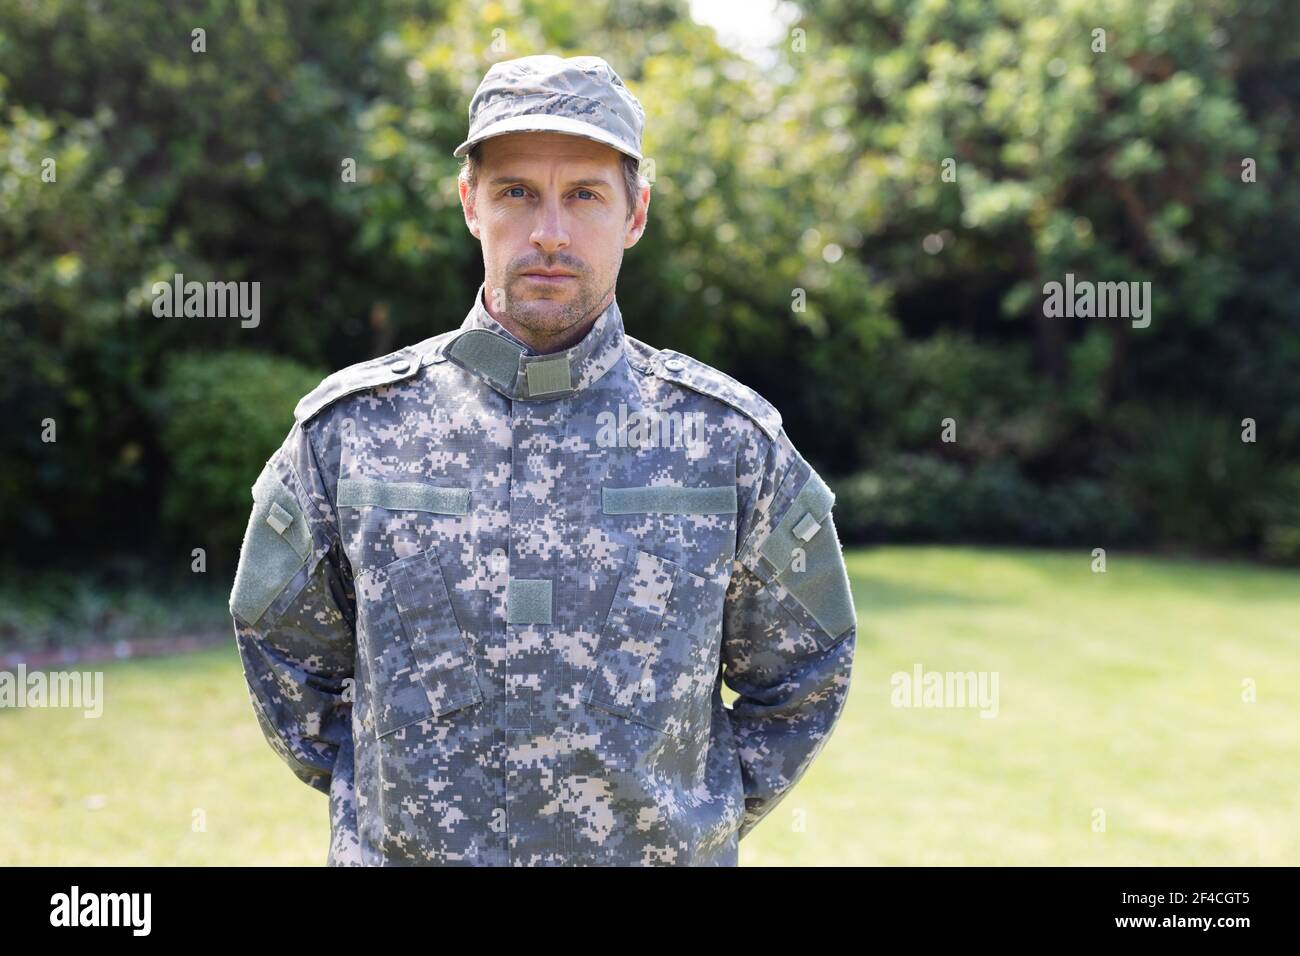 Portrait of caucasian male soldier wearing camo fatigues and cap standing in garden Stock Photo